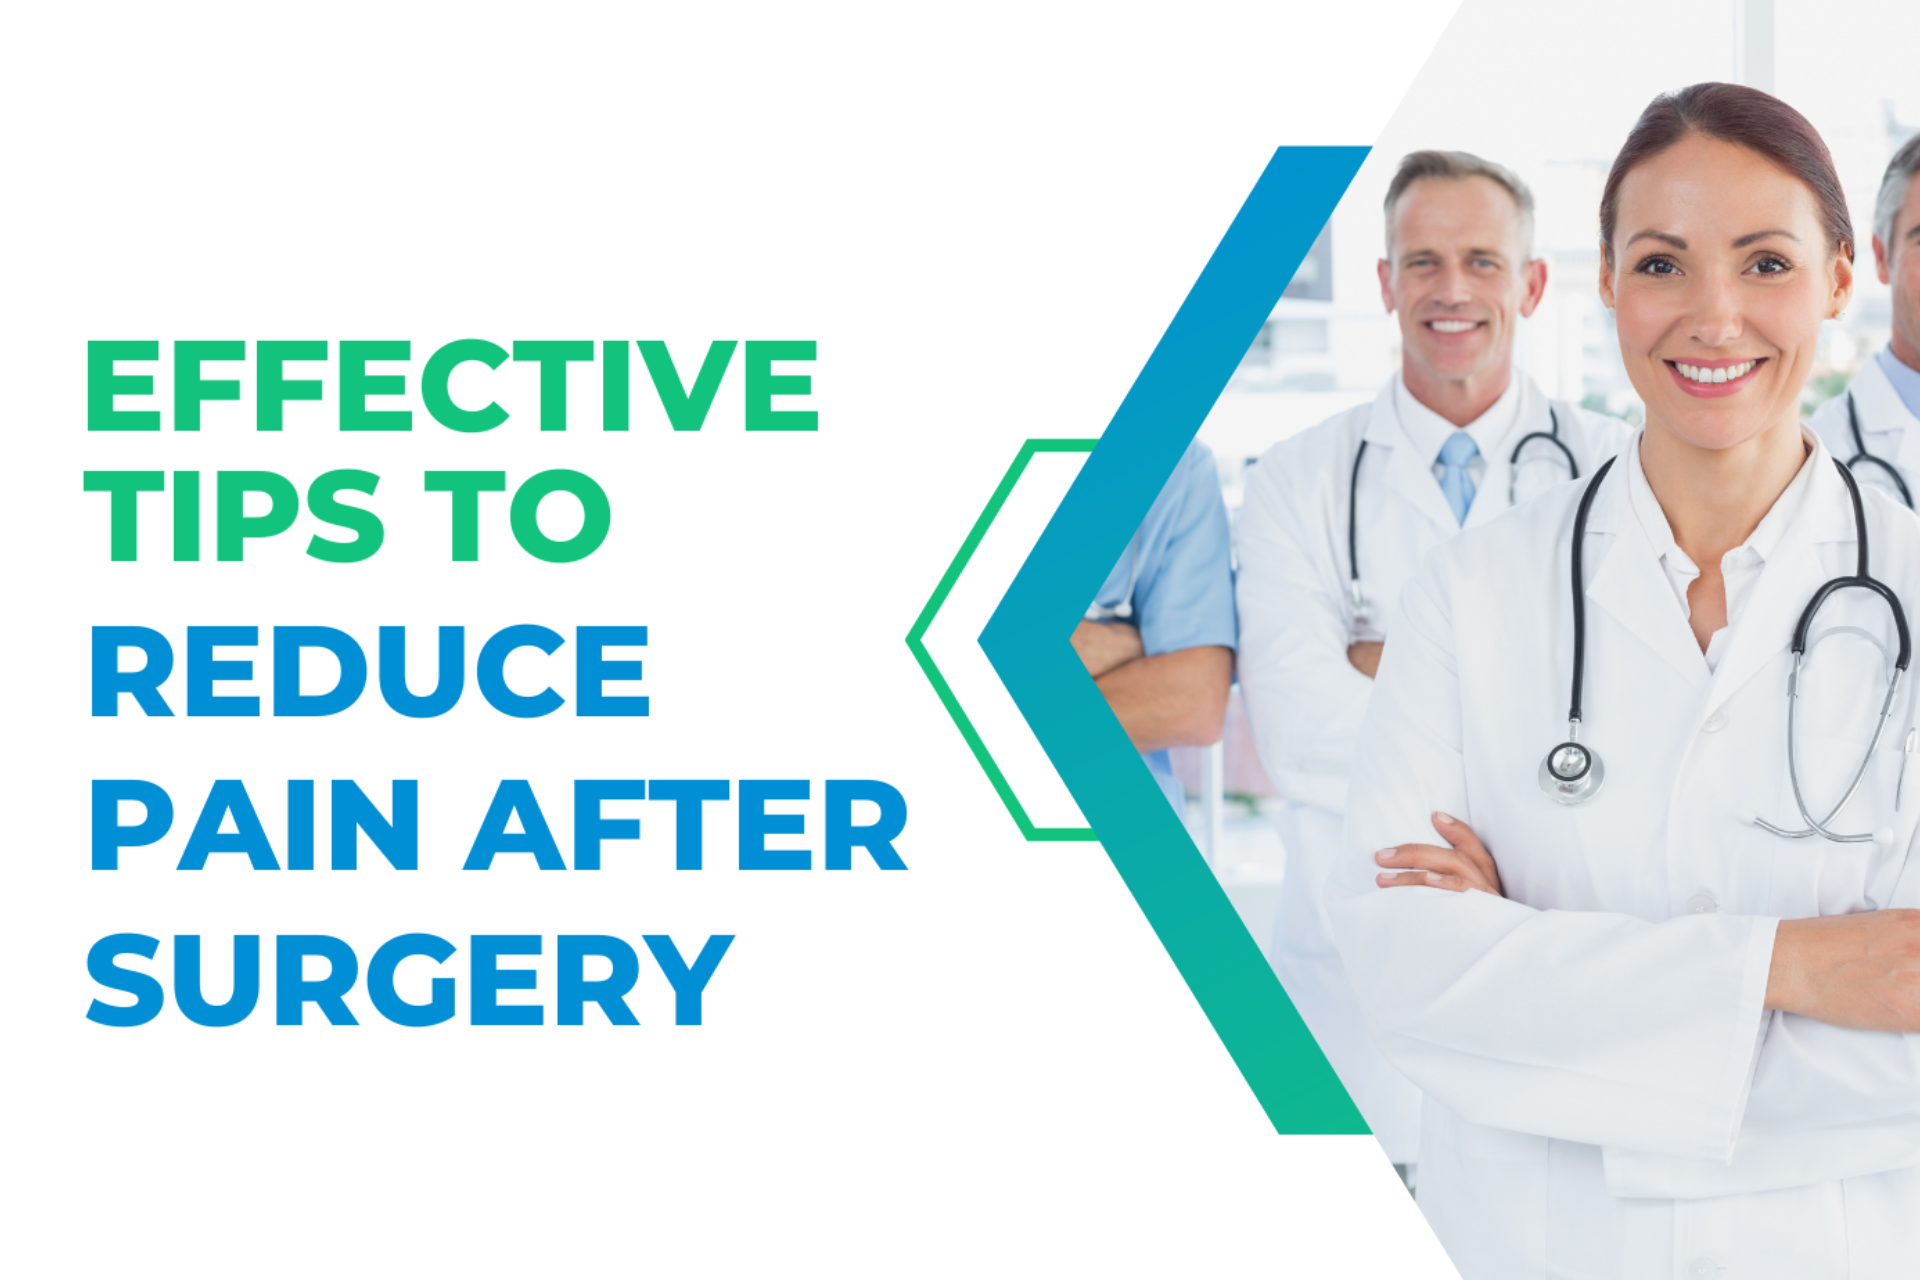 Some Effective Tips to Reduce the Pain after Surgery